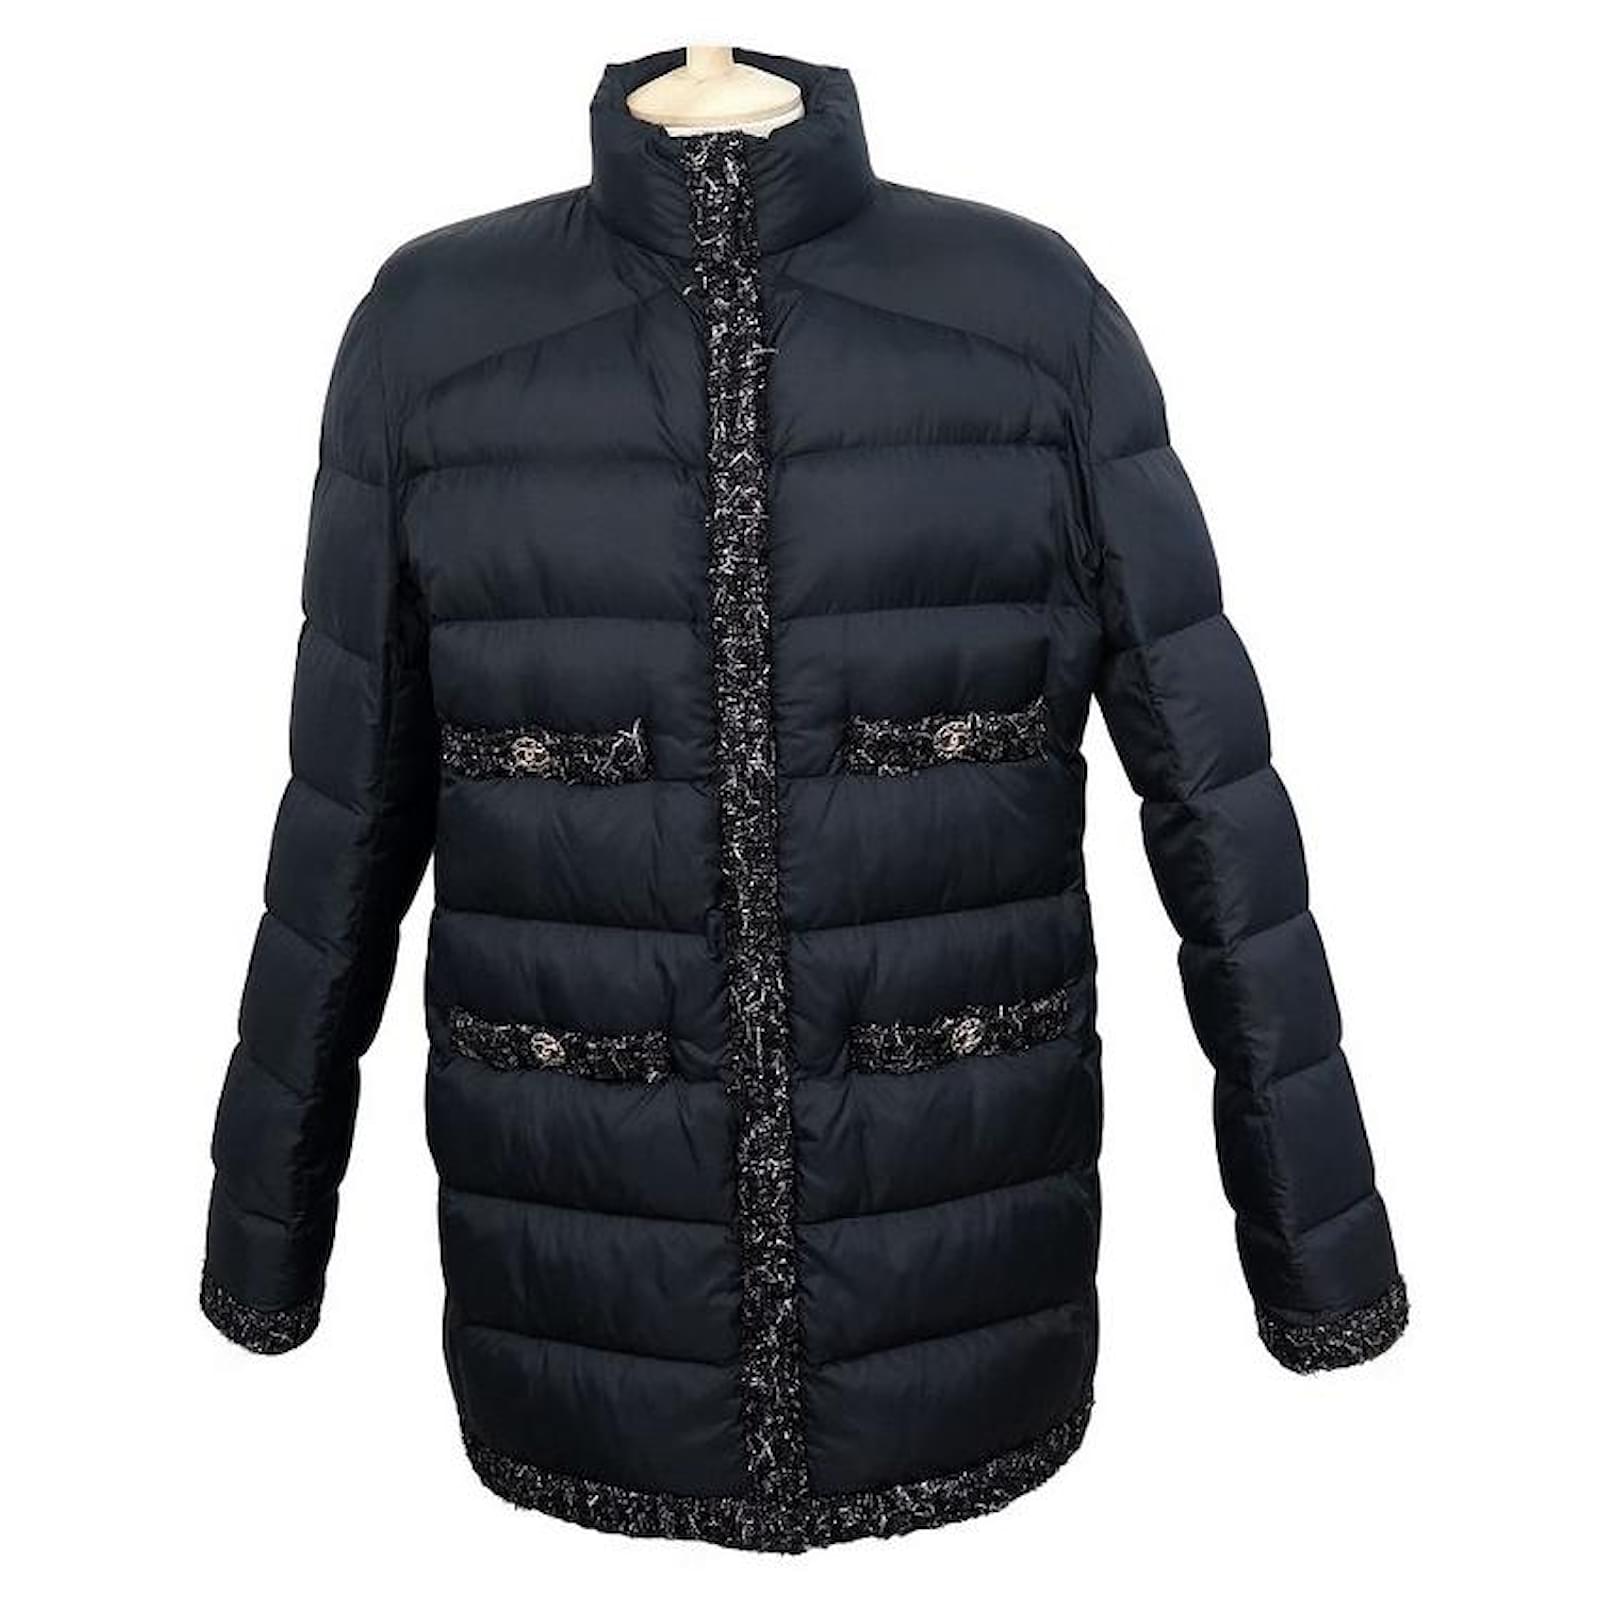 Coats, Outerwear Chanel New Chanel Down Coat T 44 L CC Buttons Tweed Bands Jacket Coat